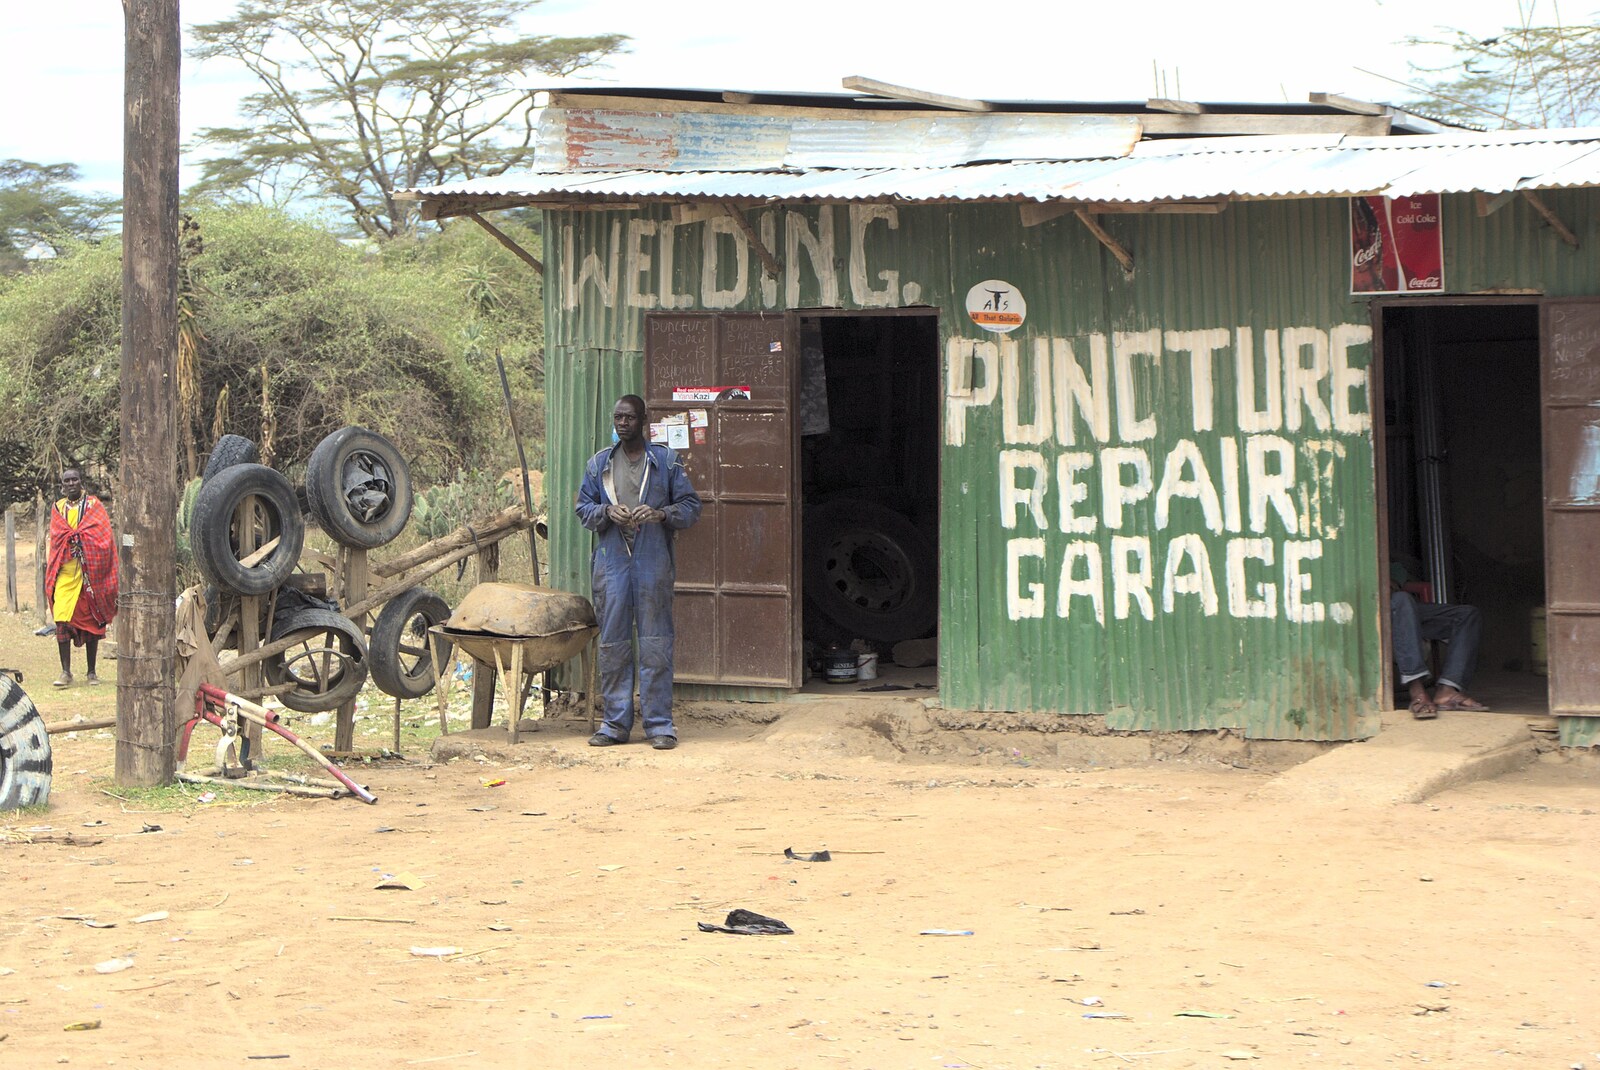 Outisde Narok, there's a welder and puncture repair specialist from Nairobi and the Road to Maasai Mara, Kenya, Africa - 1st November 2010